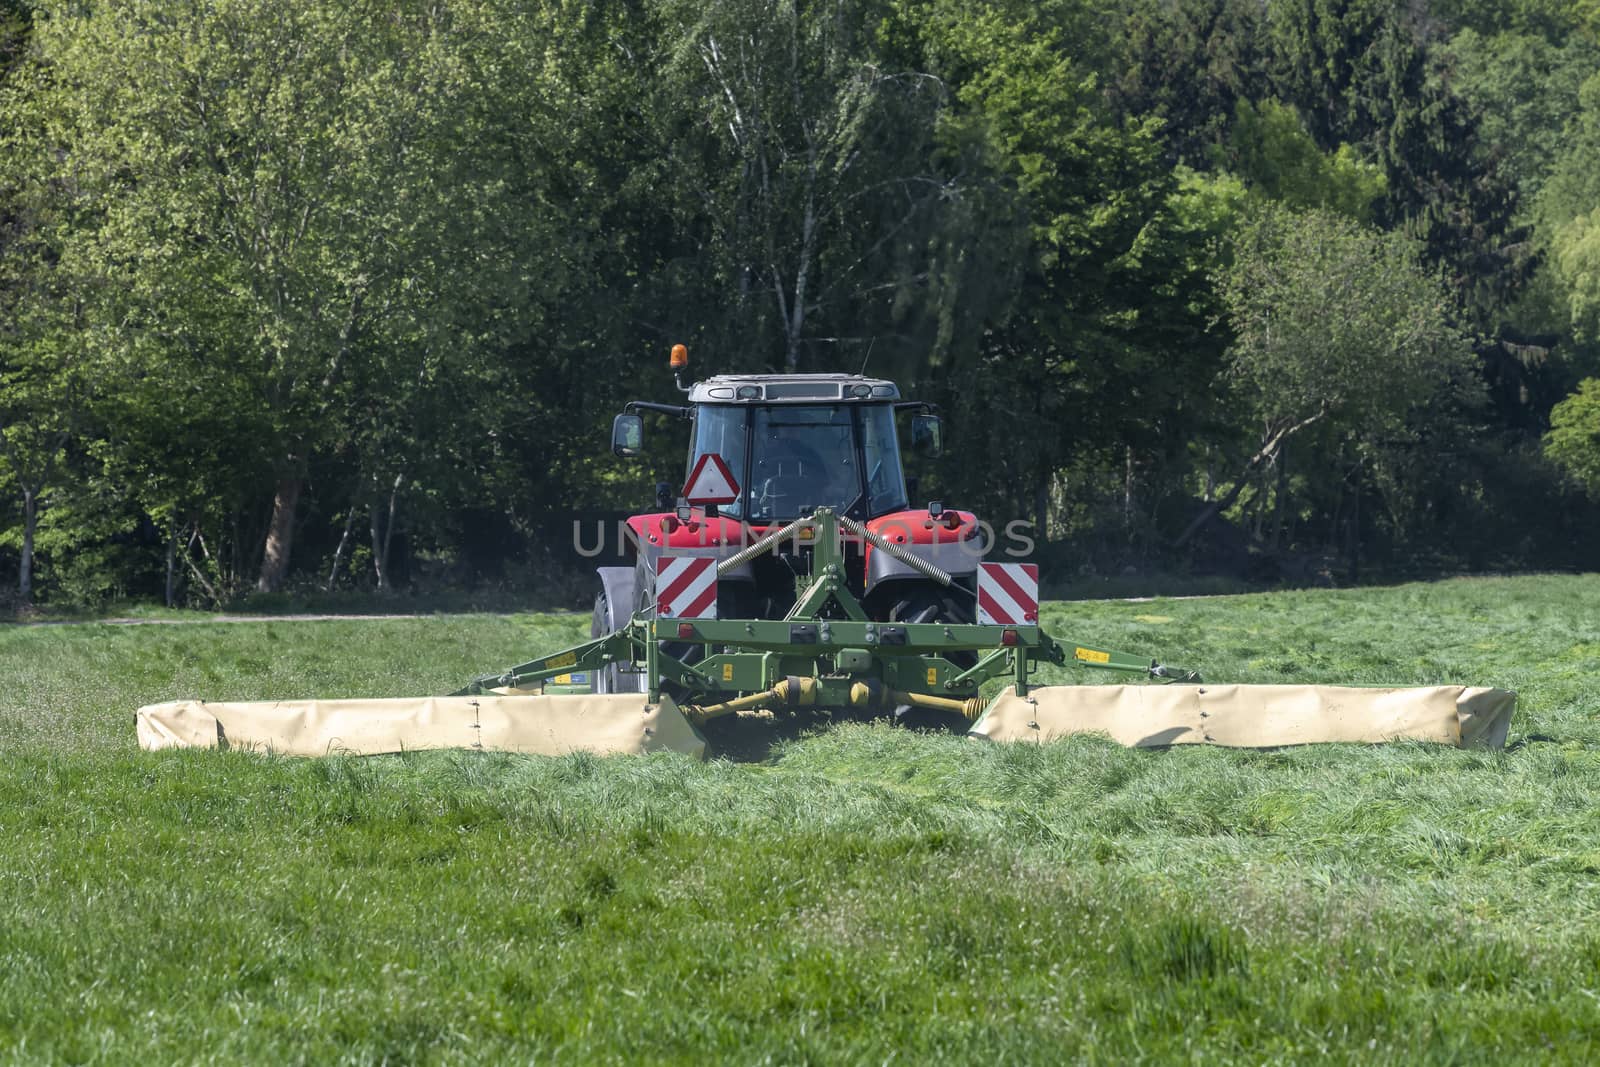 Red tractor mowing tall green grass in early spring in the Nethe by Tofotografie